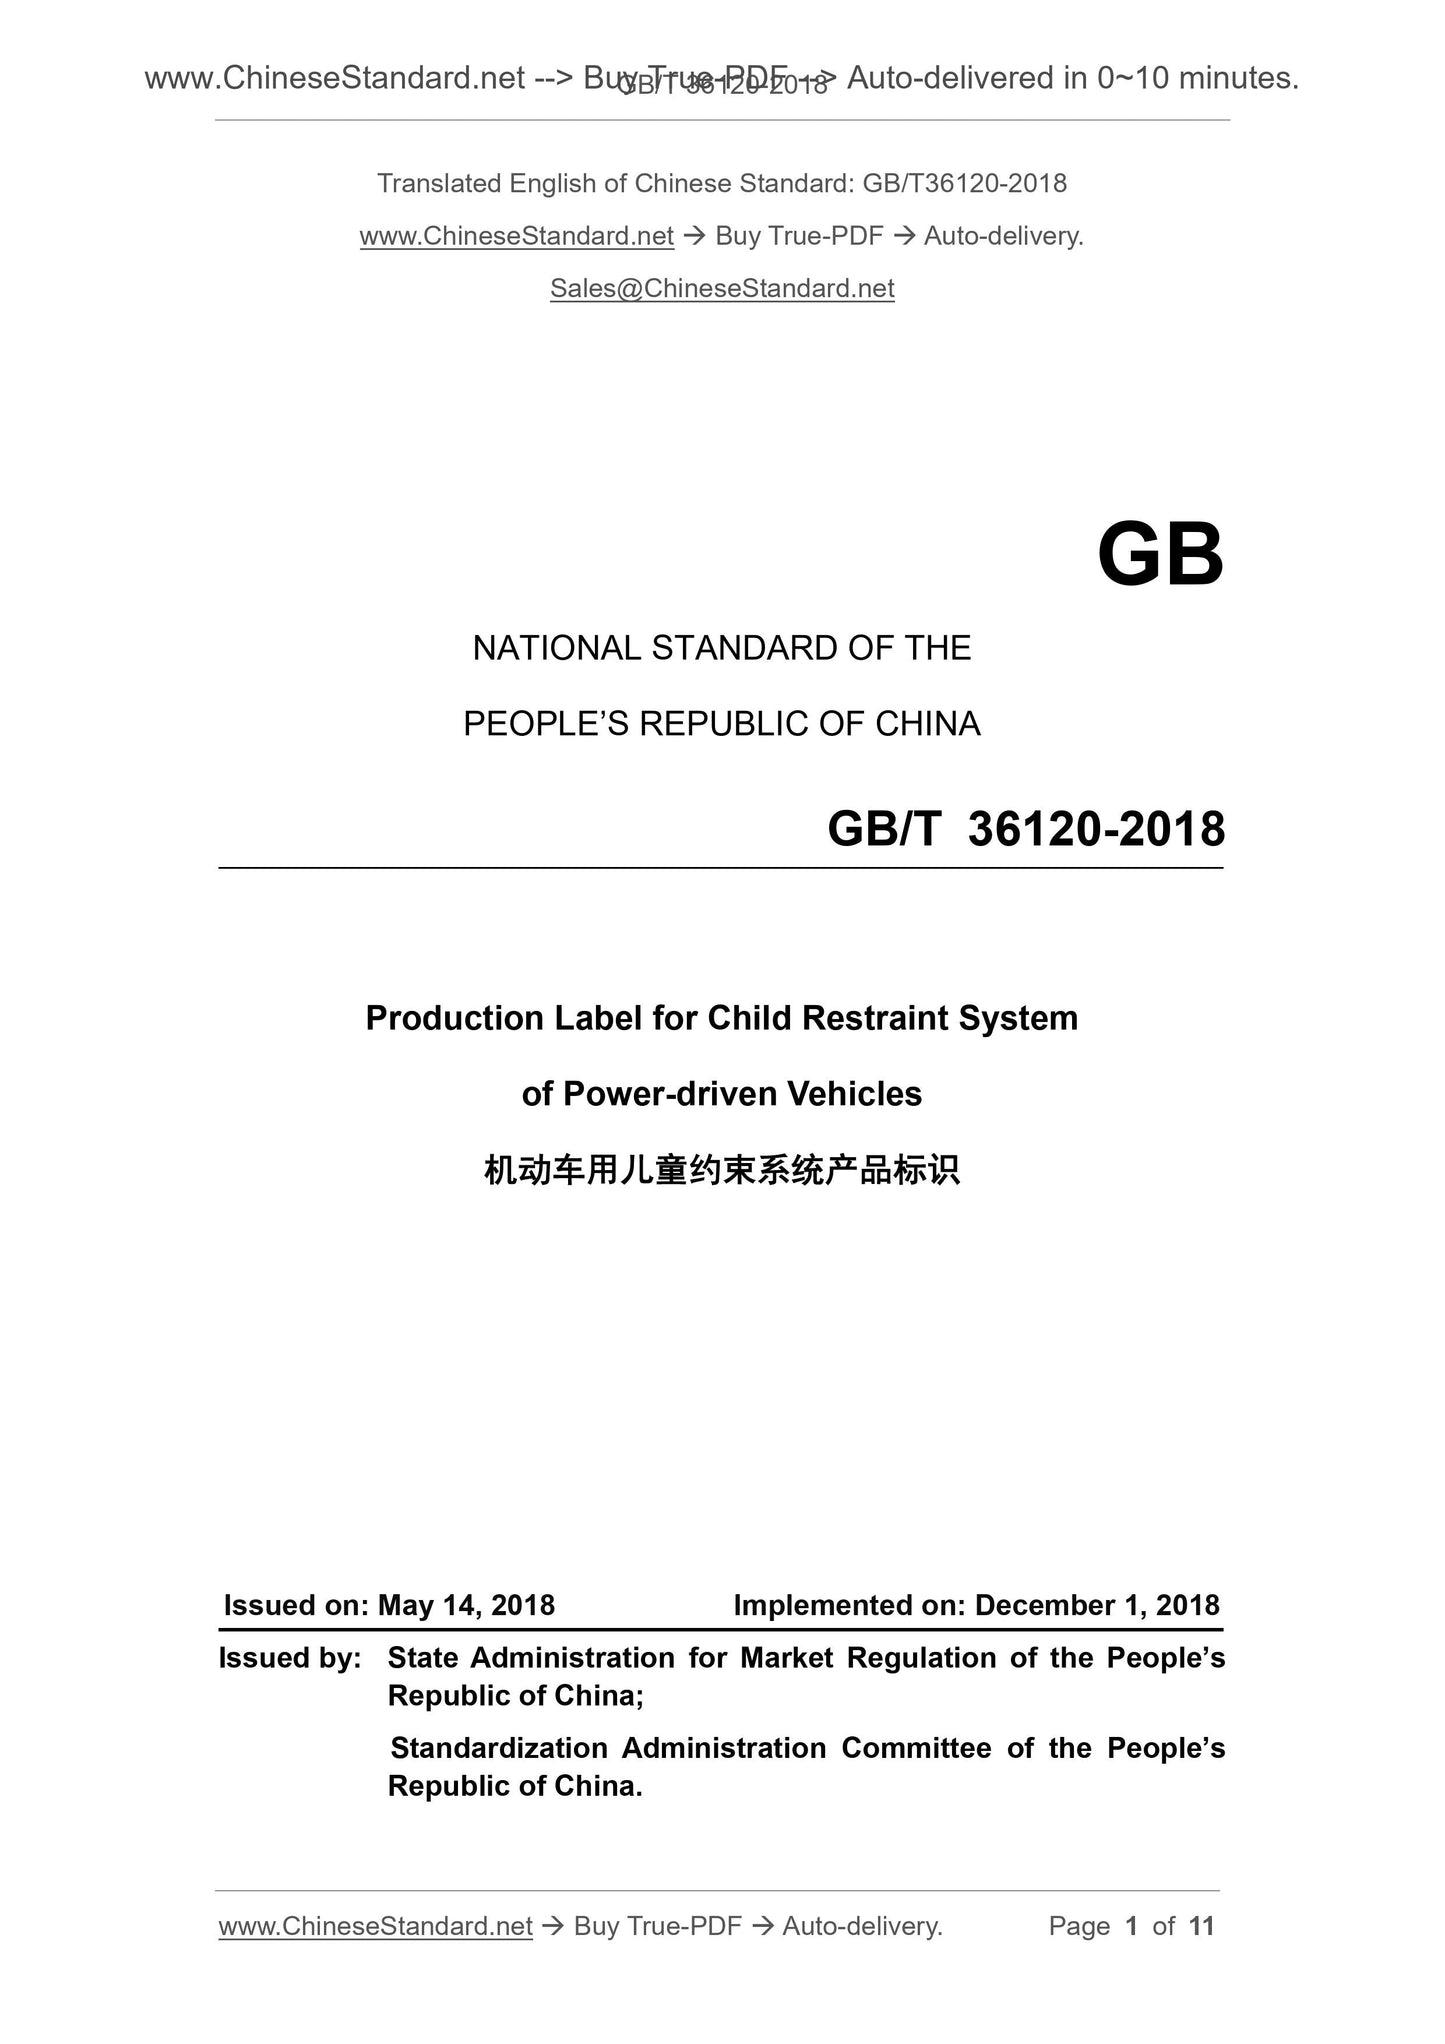 GB/T 36120-2018 Page 1